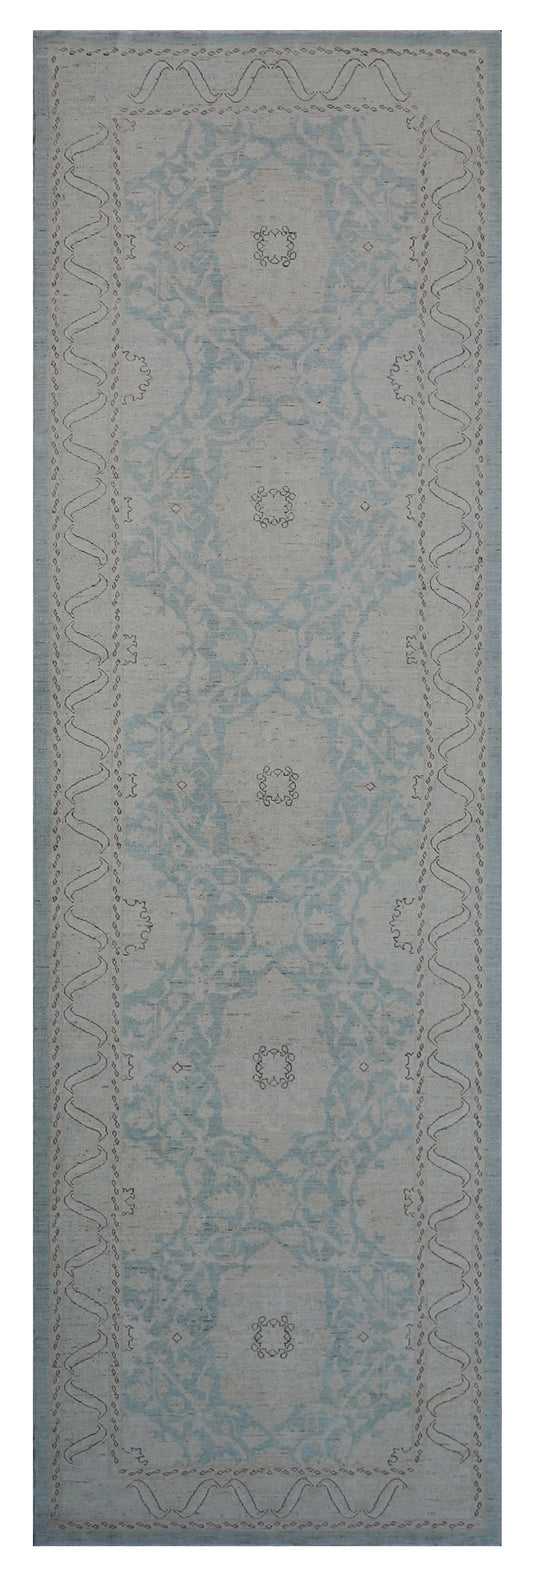 4'x14' Ariana Wide and Long Blue Ivory Tabriz Design Traditional Runner Rug